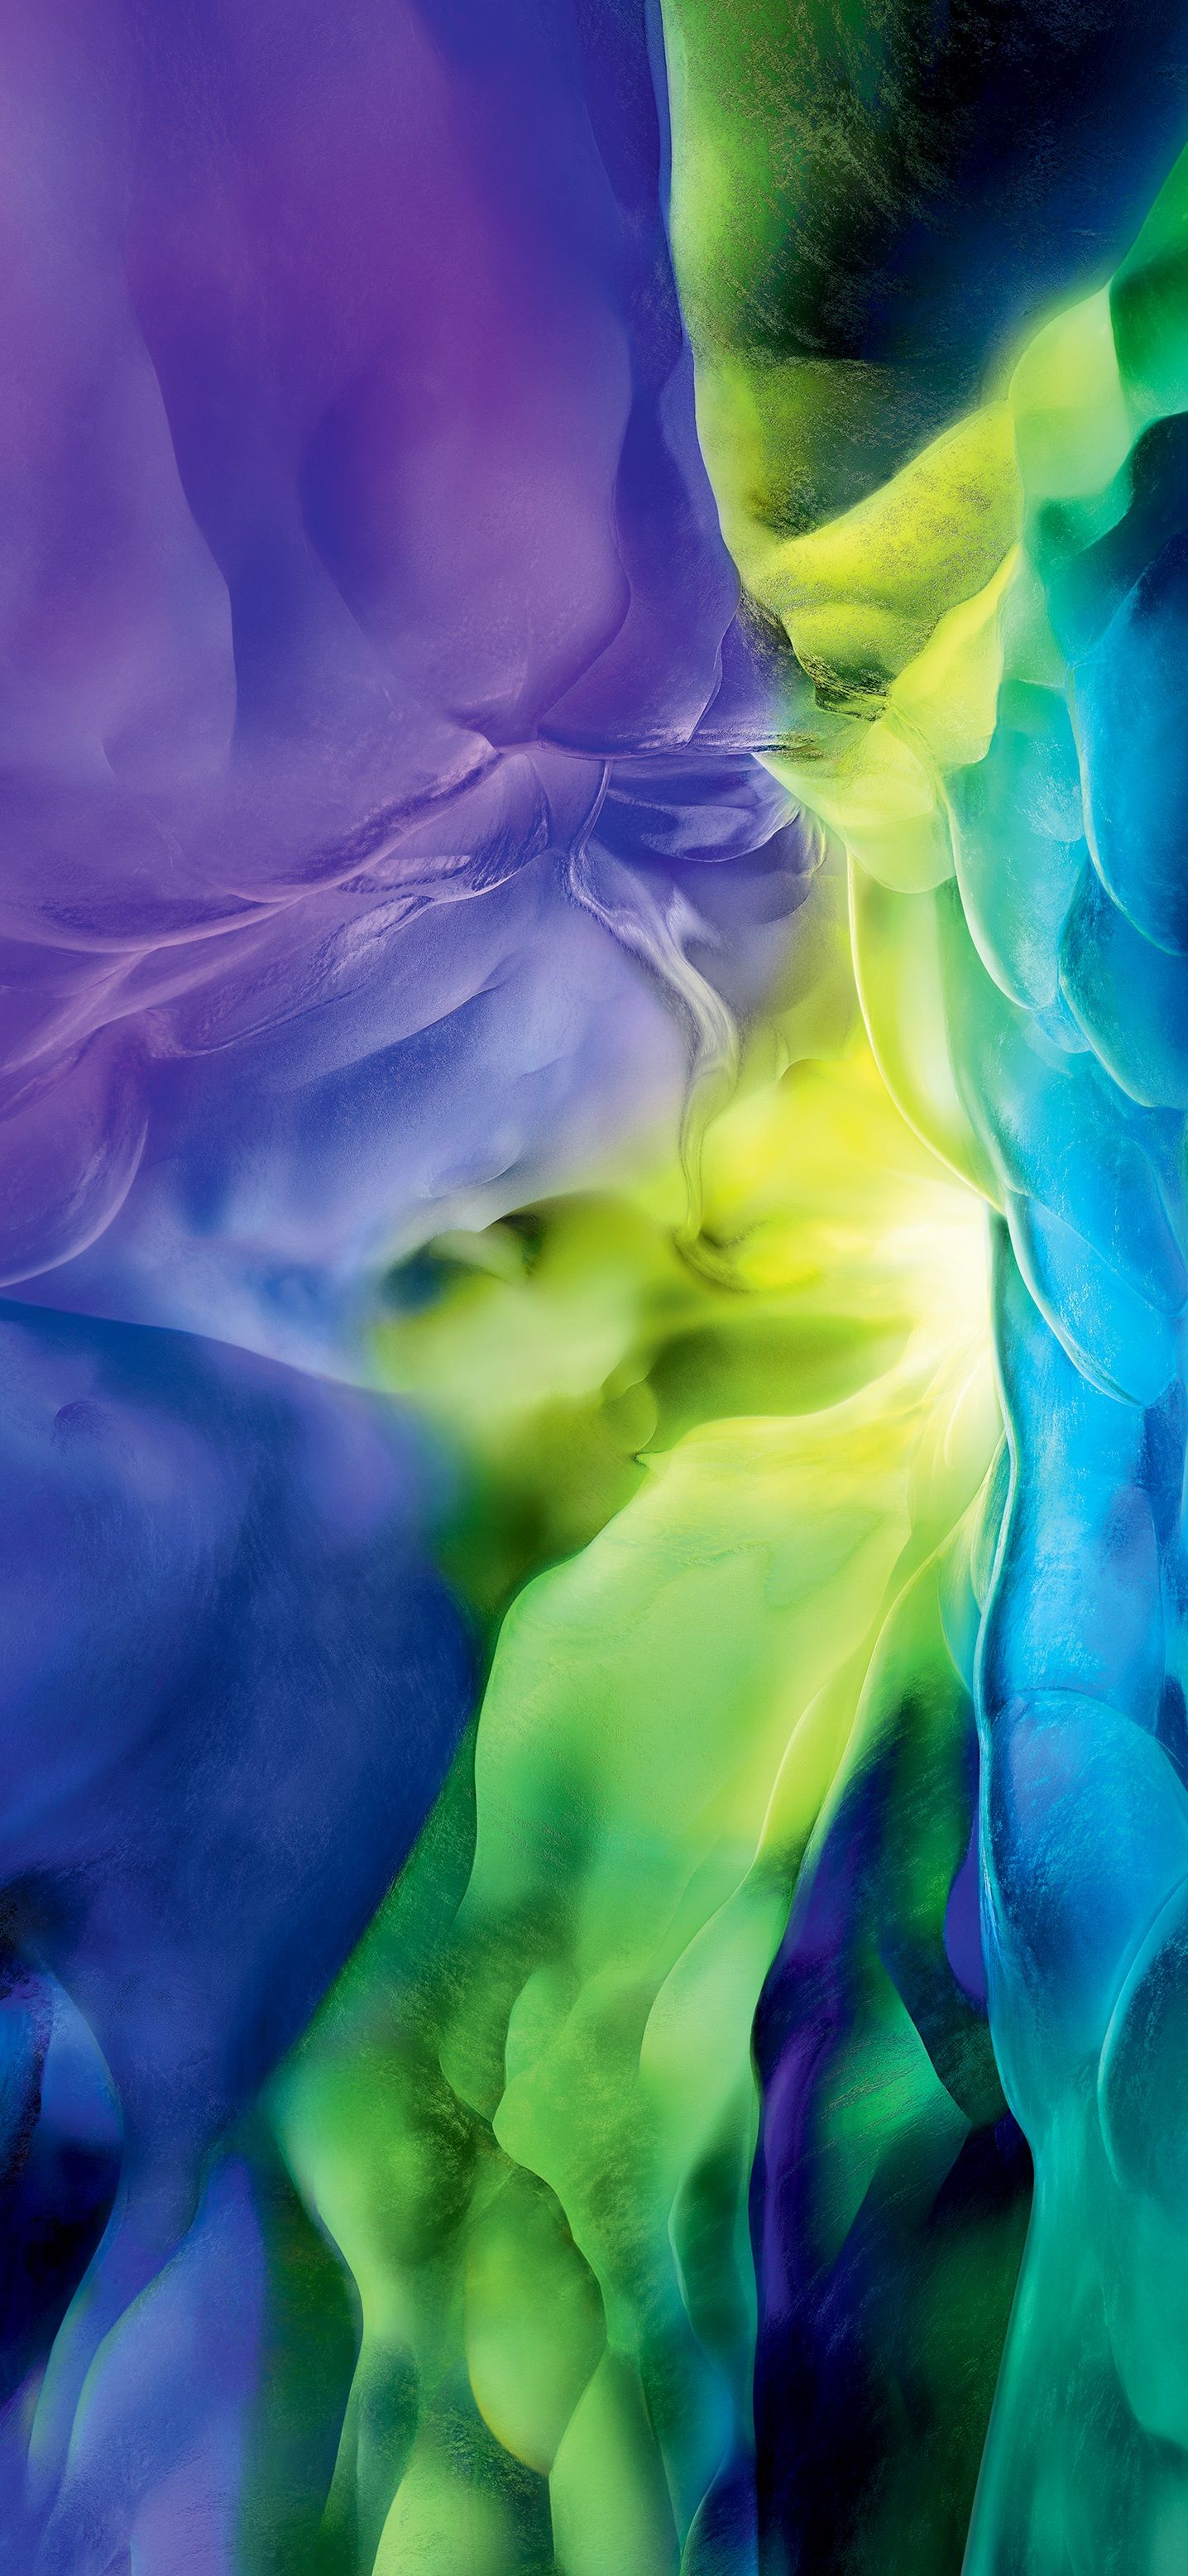 Galaxy Note 20 Wallpapers